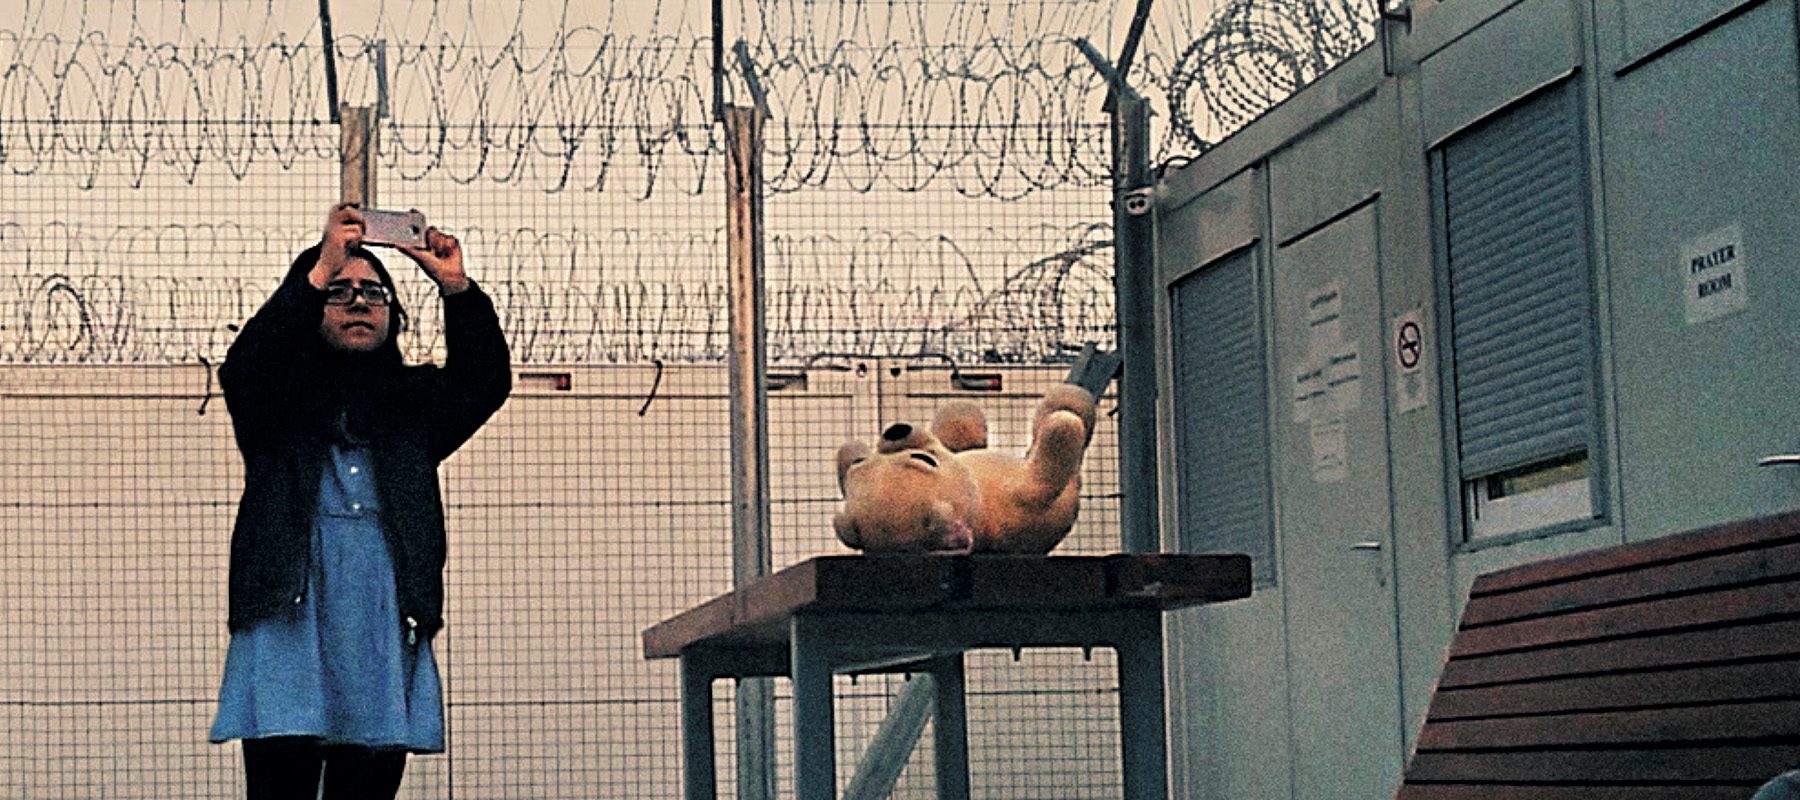 A girl is taking photos inside if a fence topped with razor wire. A teddy bear sits on a table nearby.